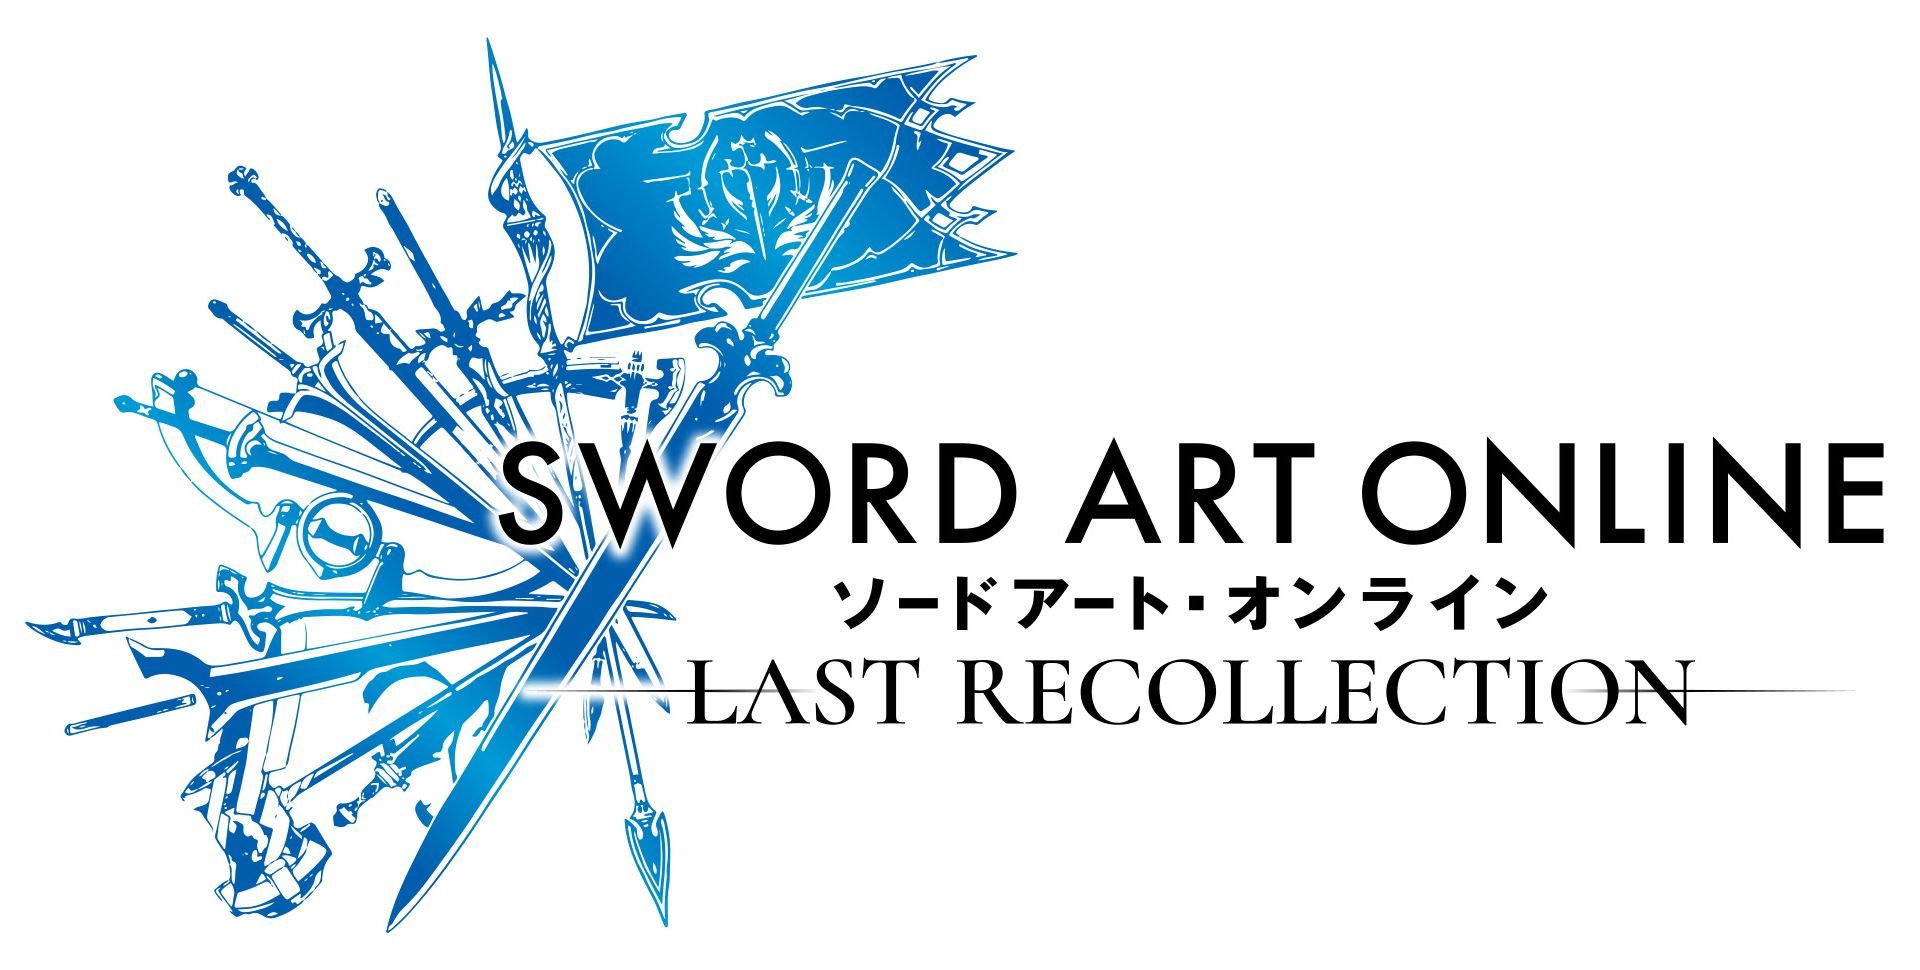 Sword Art Online Last Recollection - La guerre de l'Underworld commence aujourd'hui ! - GEEKNPLAY Home, News, PC, PlayStation 4, PlayStation 5, Xbox One, Xbox Series X|S